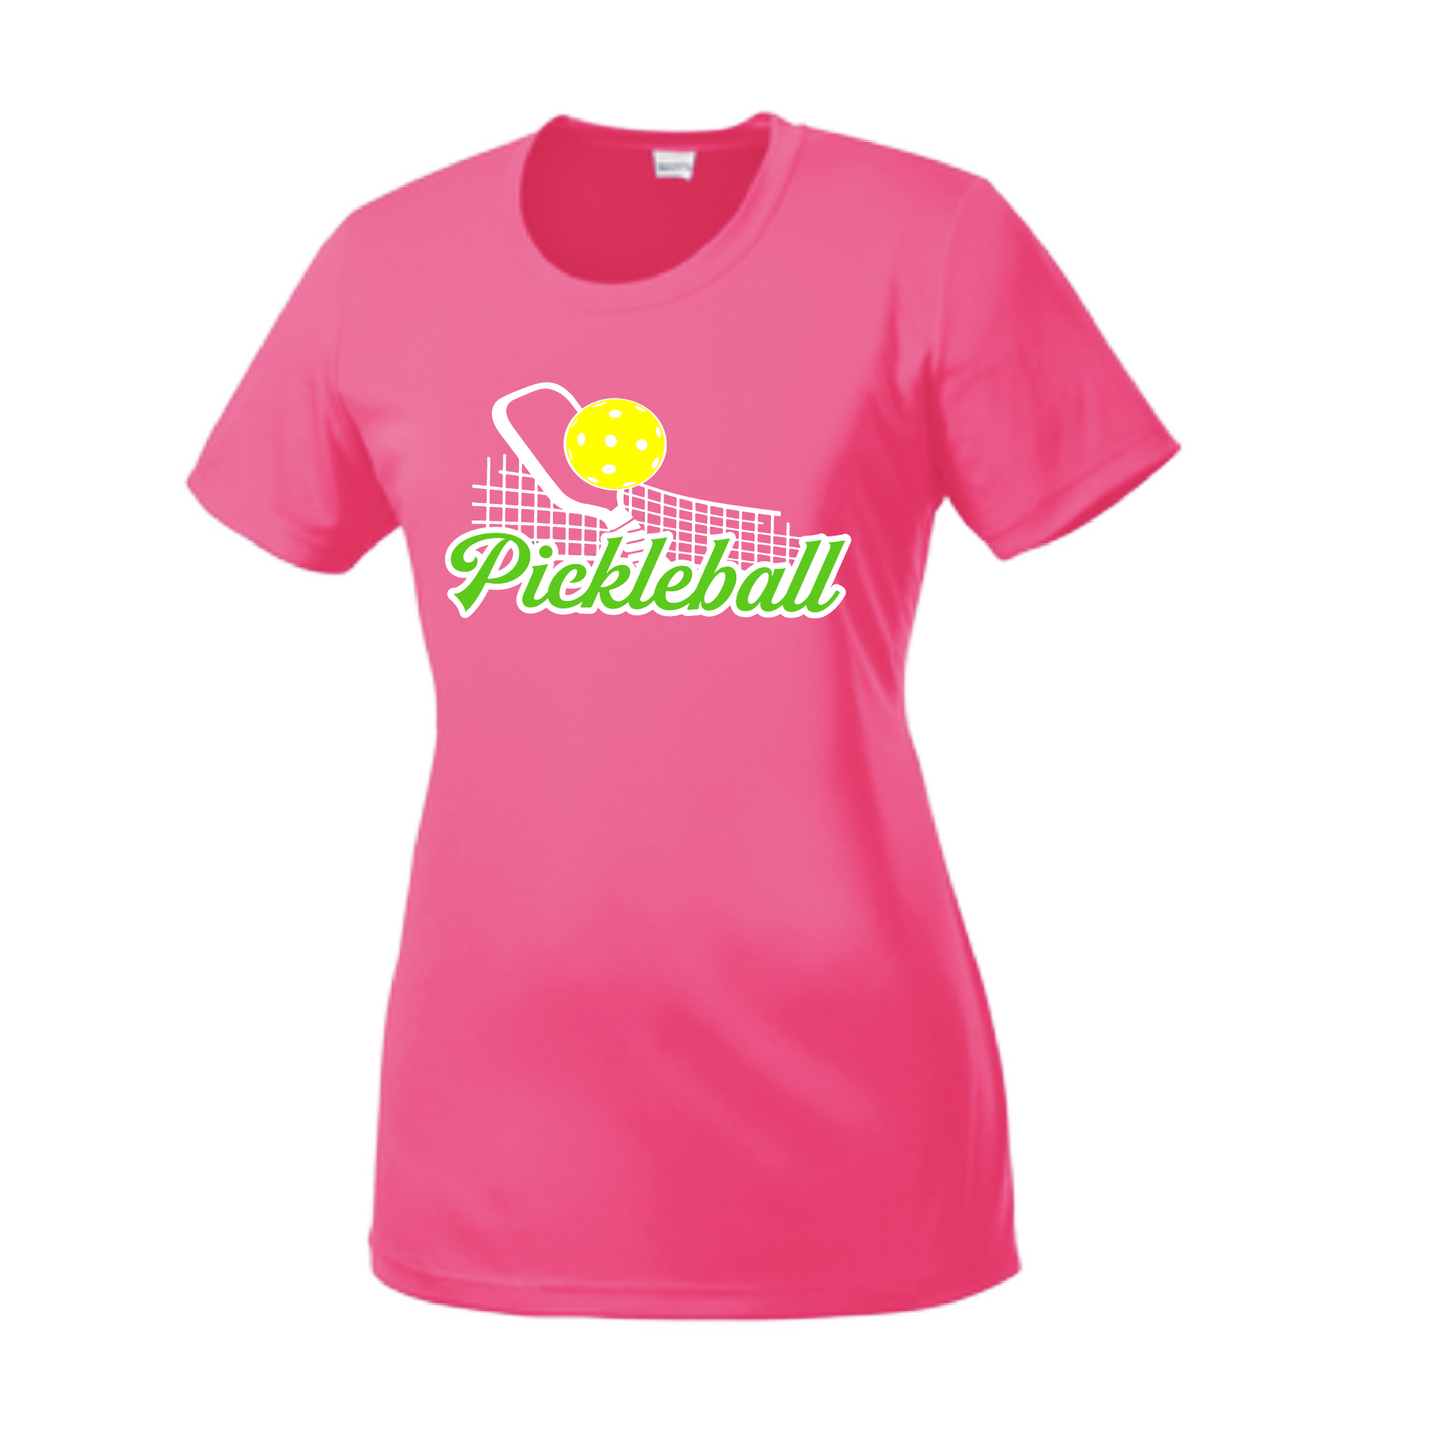 Pickleball Design: Pickleball and Net  Women's Style: Short Sleeve Crew-Neck  Turn up the volume in this Women's shirt with its perfect mix of softness and attitude. Material is ultra-comfortable with moisture wicking properties and tri-blend softness. PosiCharge technology locks in color. Highly breathable and lightweight.